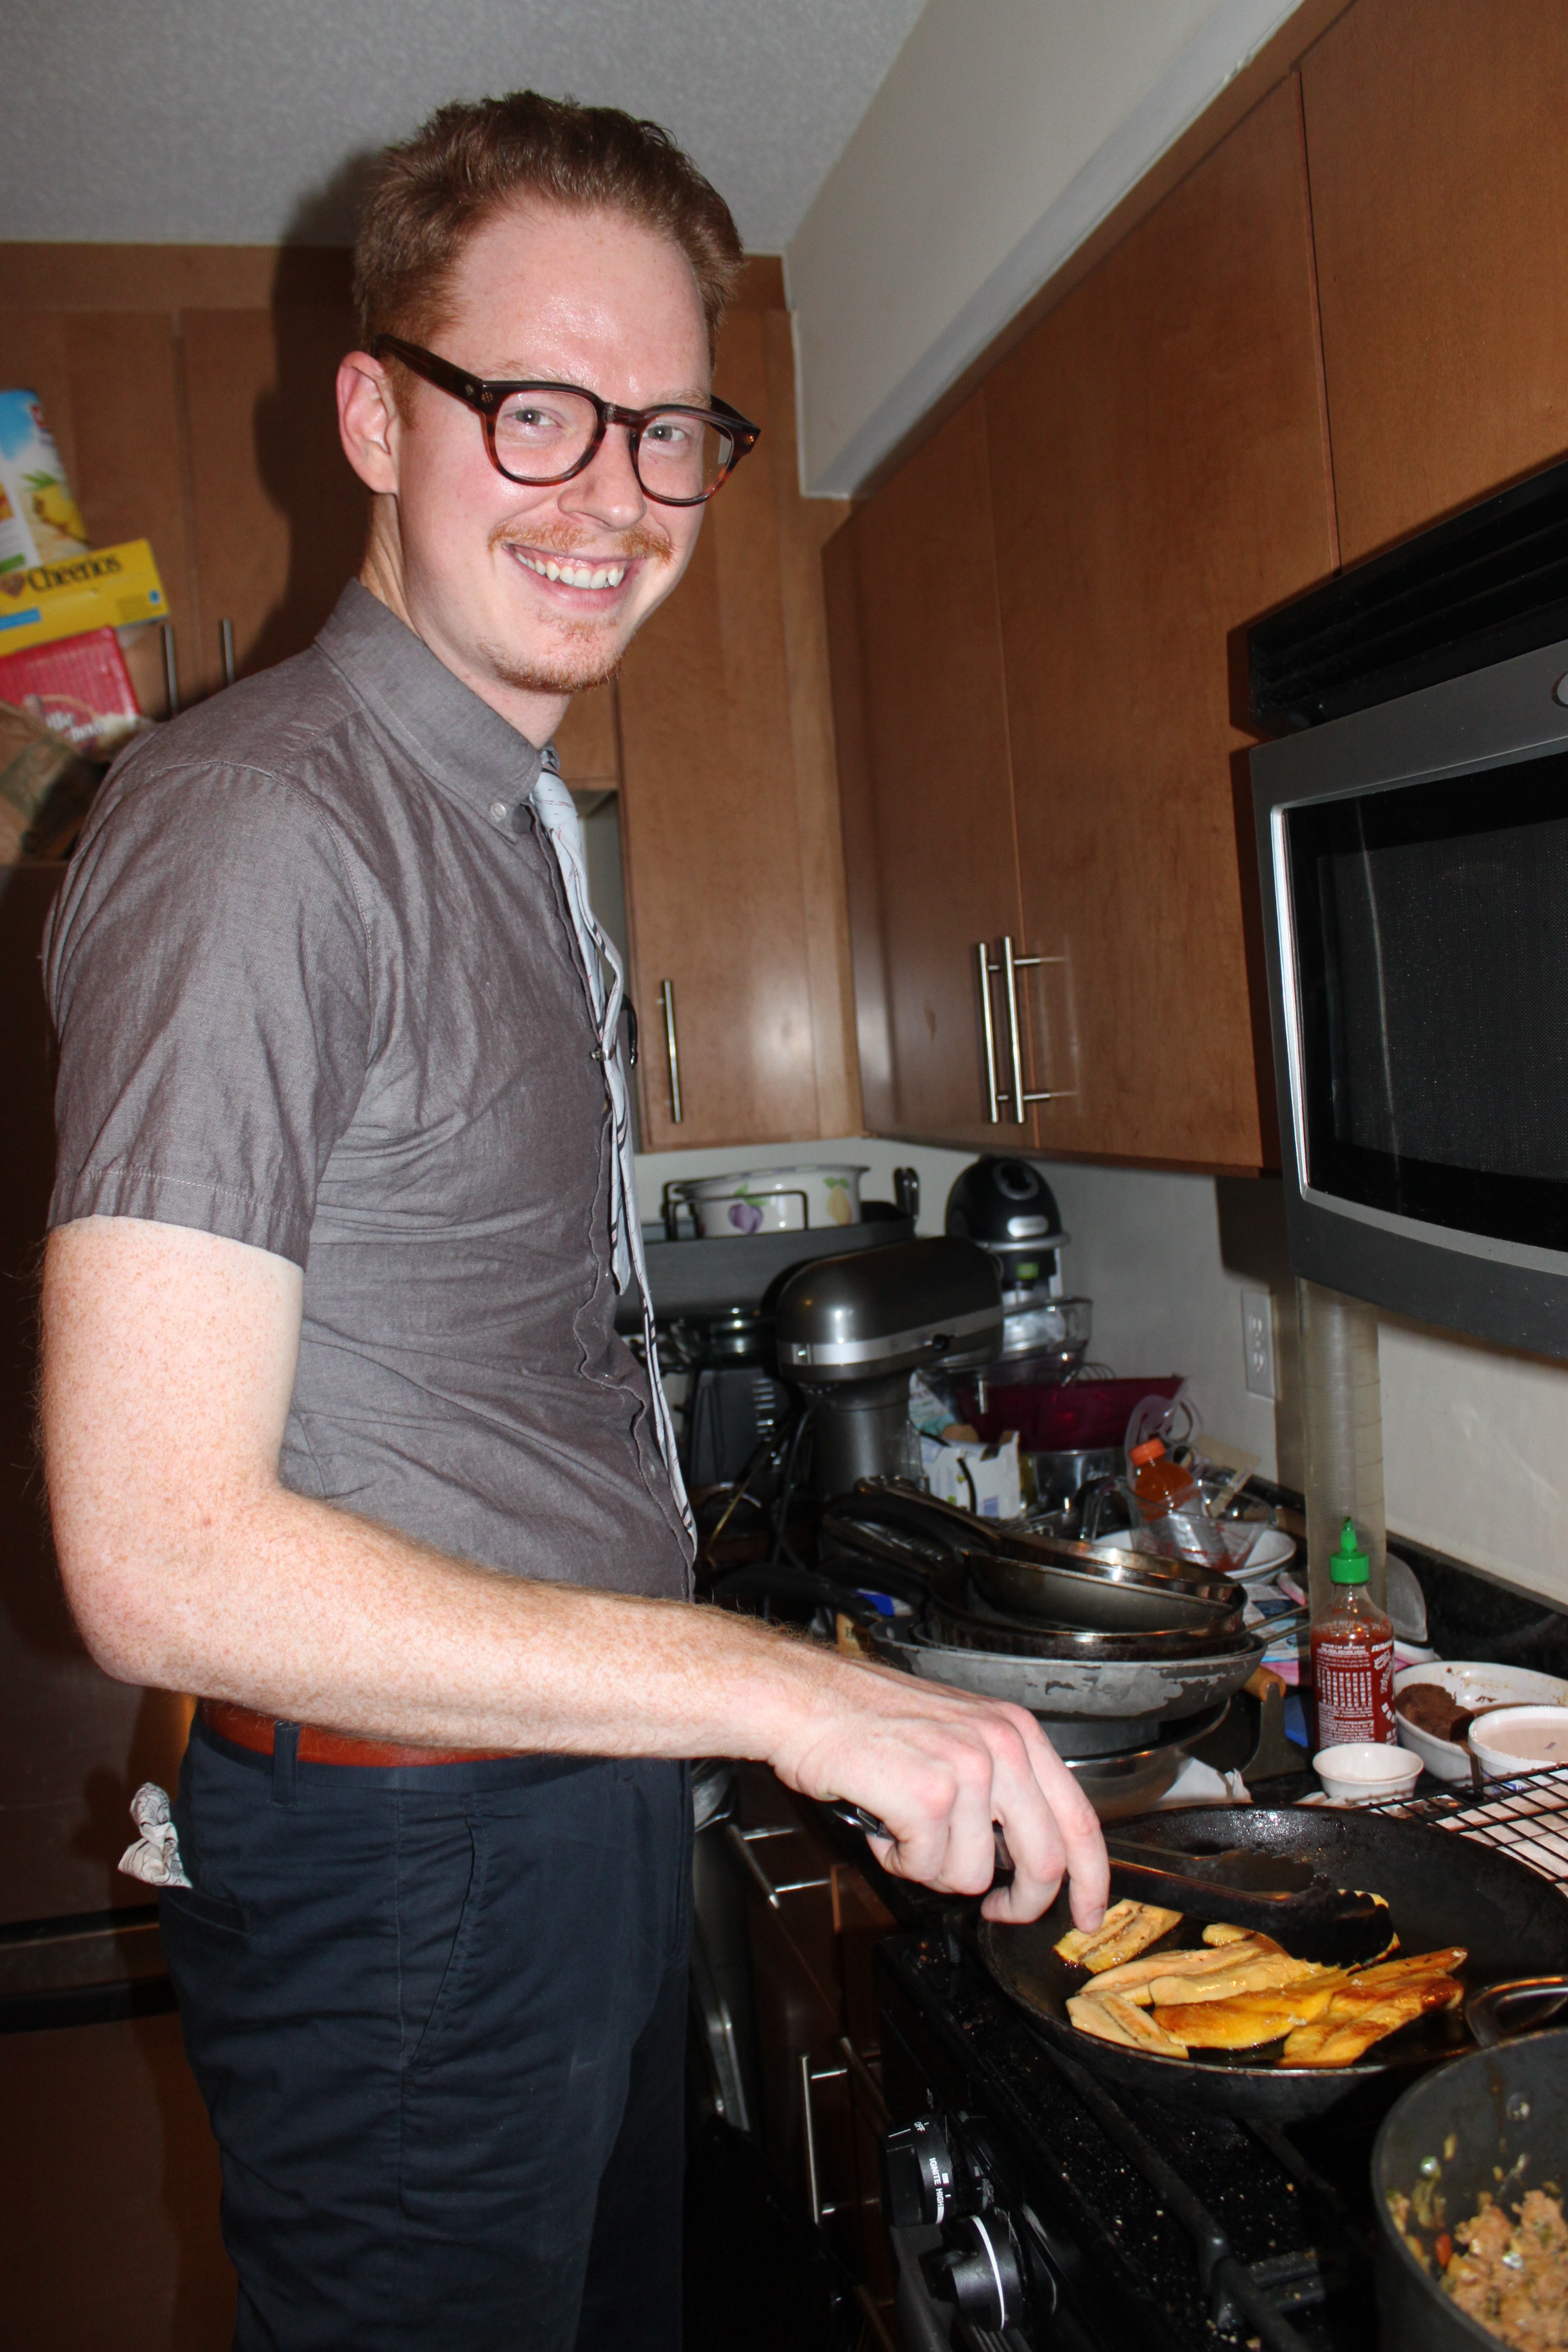 Put Eric to work frying the plantains, to distract him from Hurricane Jo ravaging his sanctuary.